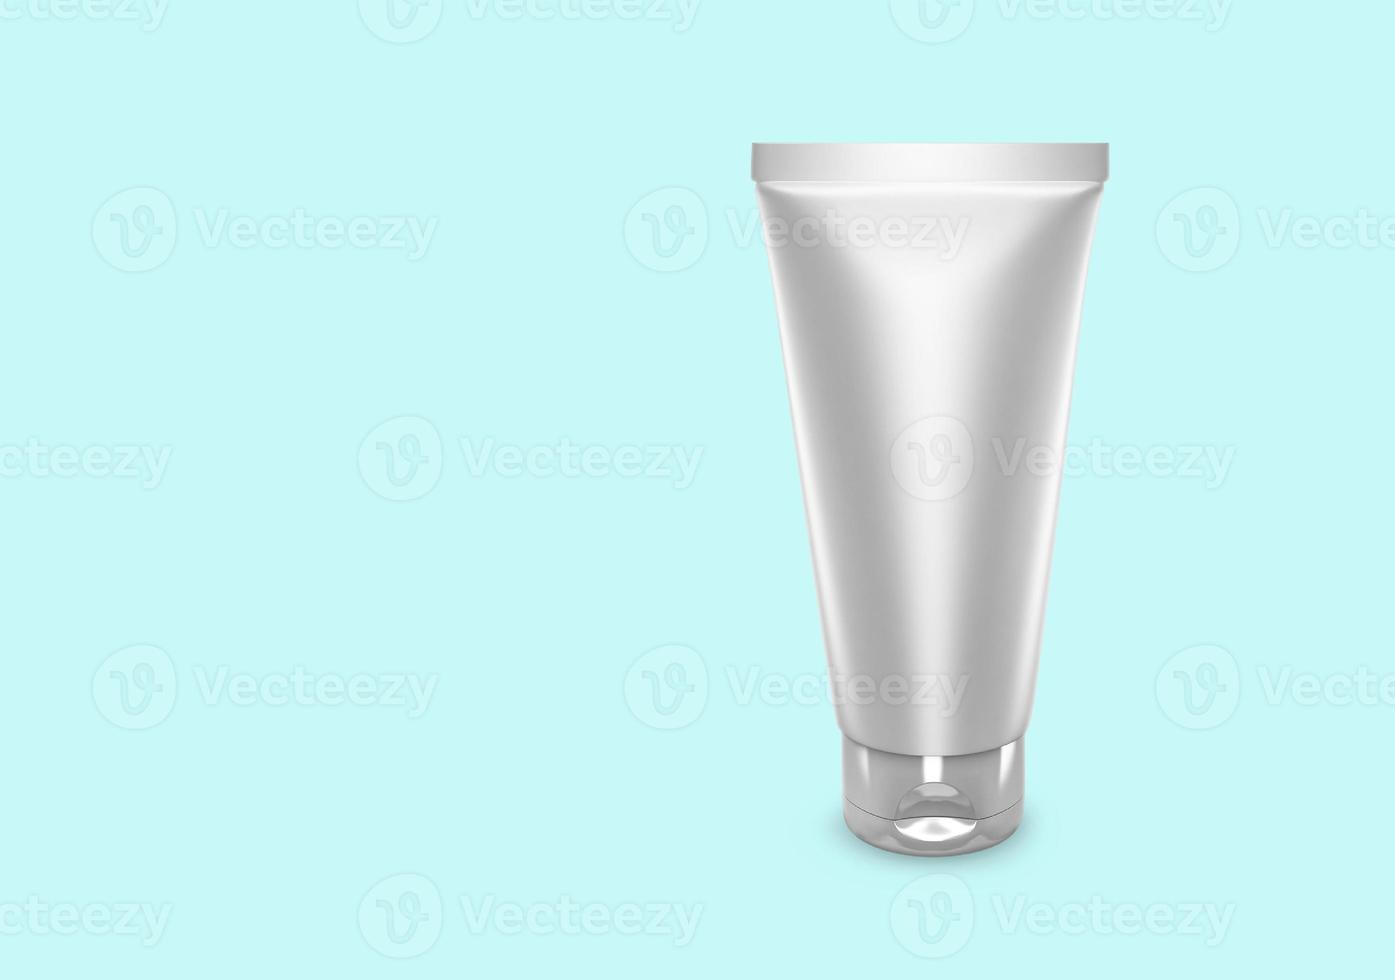 Silver white scrub tube mockup isolated from background scrub tube package design. Blank hygiene, medical, body or facial care template. 3d illustration photo